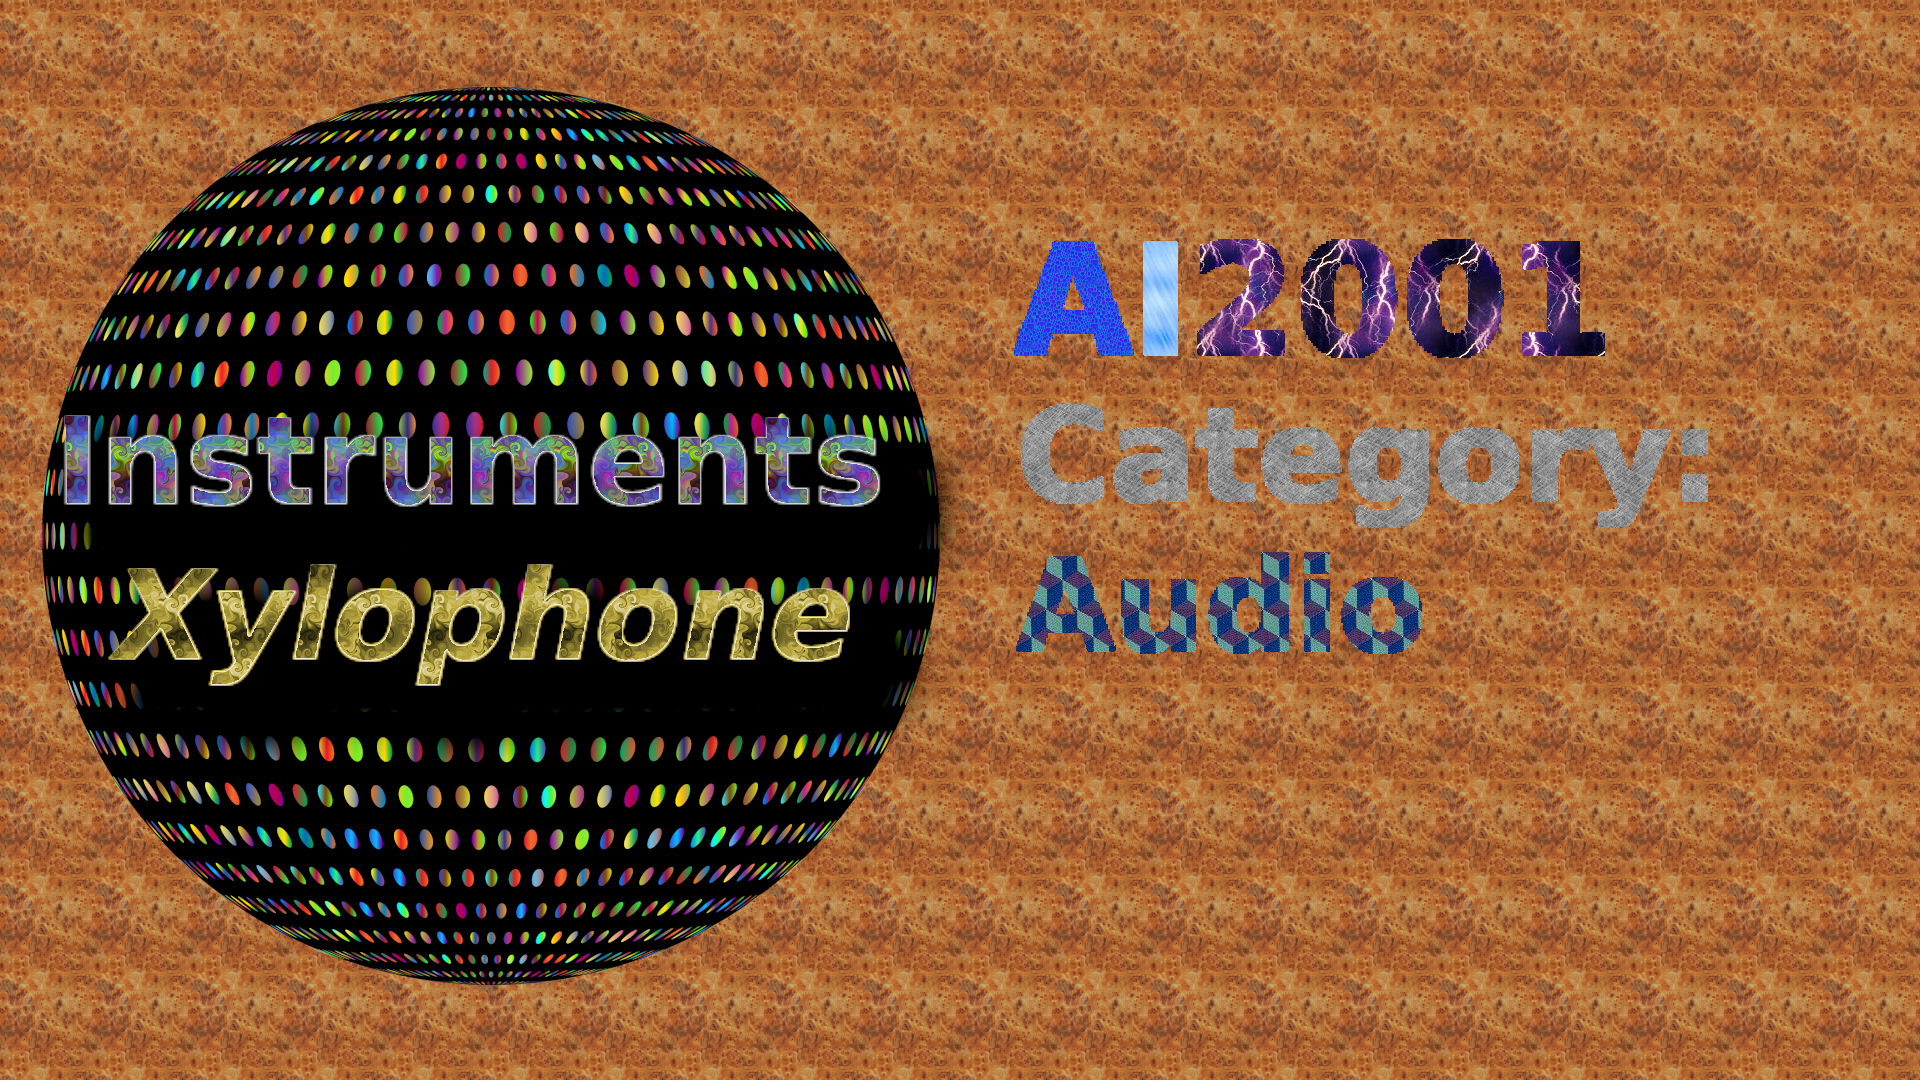 AI2001_Category-Audio-SC-Instruments-S-Xylophone